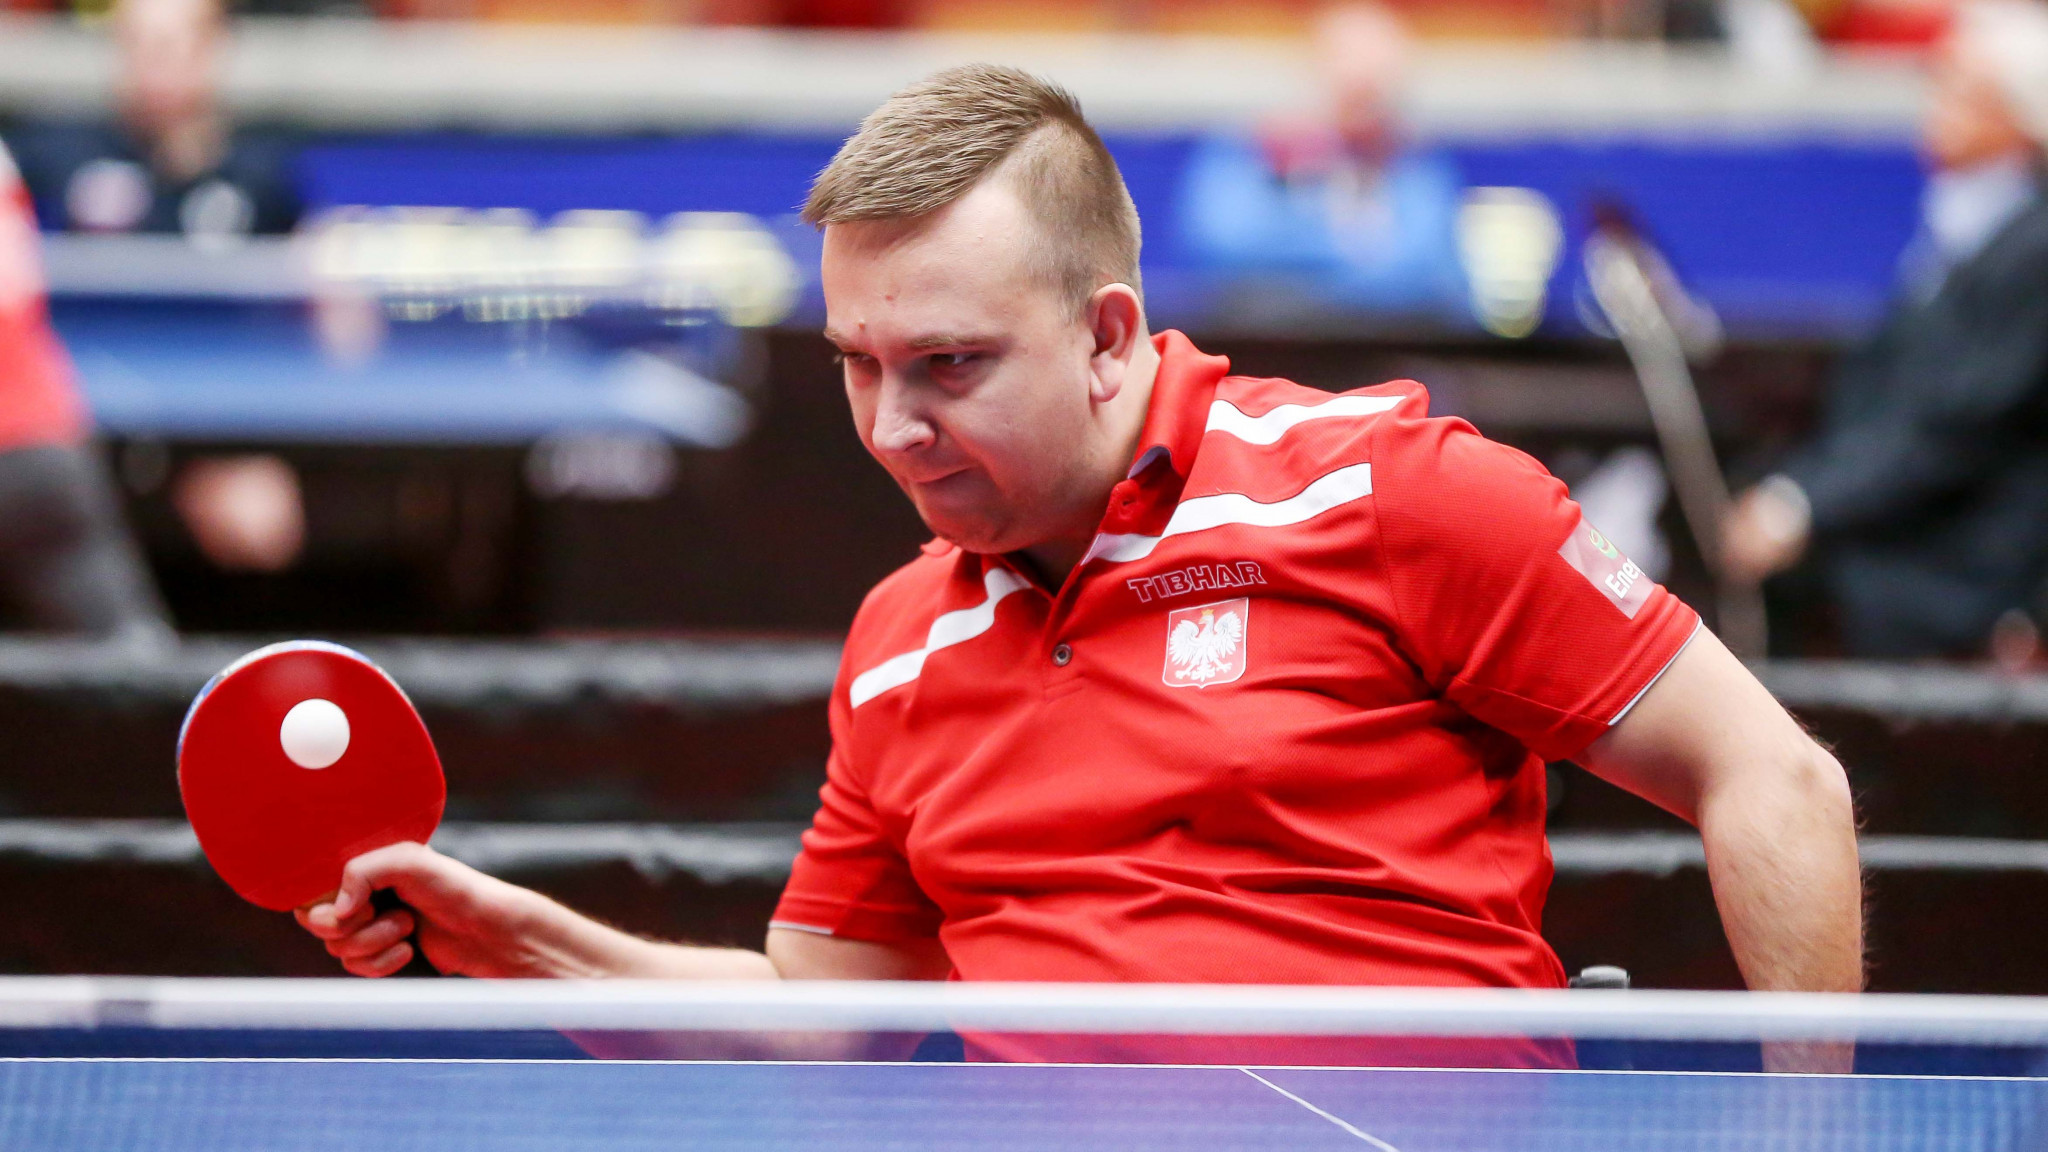 Poland’s giantkilling pairing of Rafal Czuper, pictured, and Tomasz Jakimczuk are through to the class 1-2 team semi-finals ©ITTF